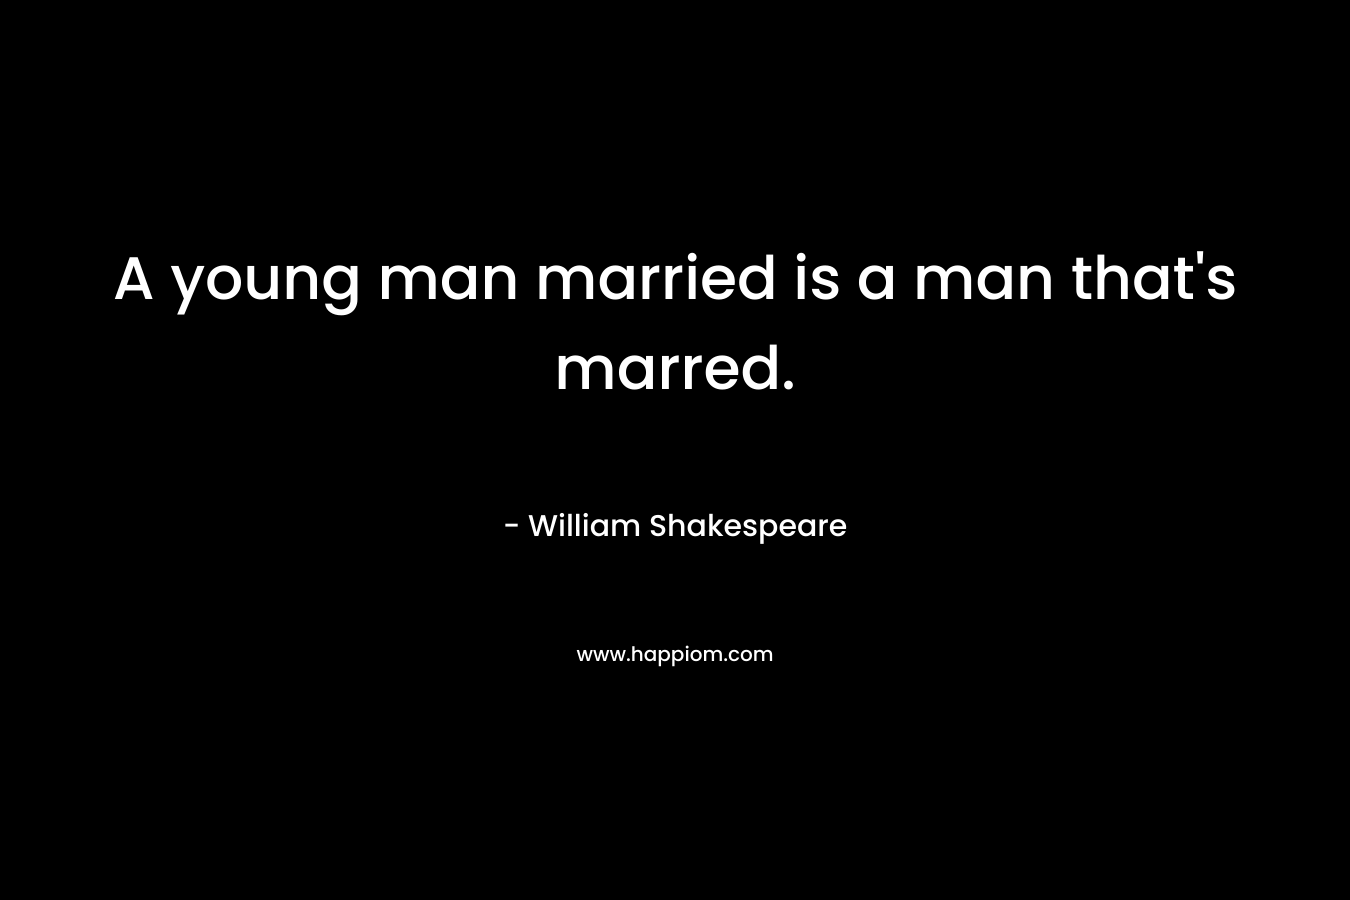 A young man married is a man that’s marred. – William Shakespeare